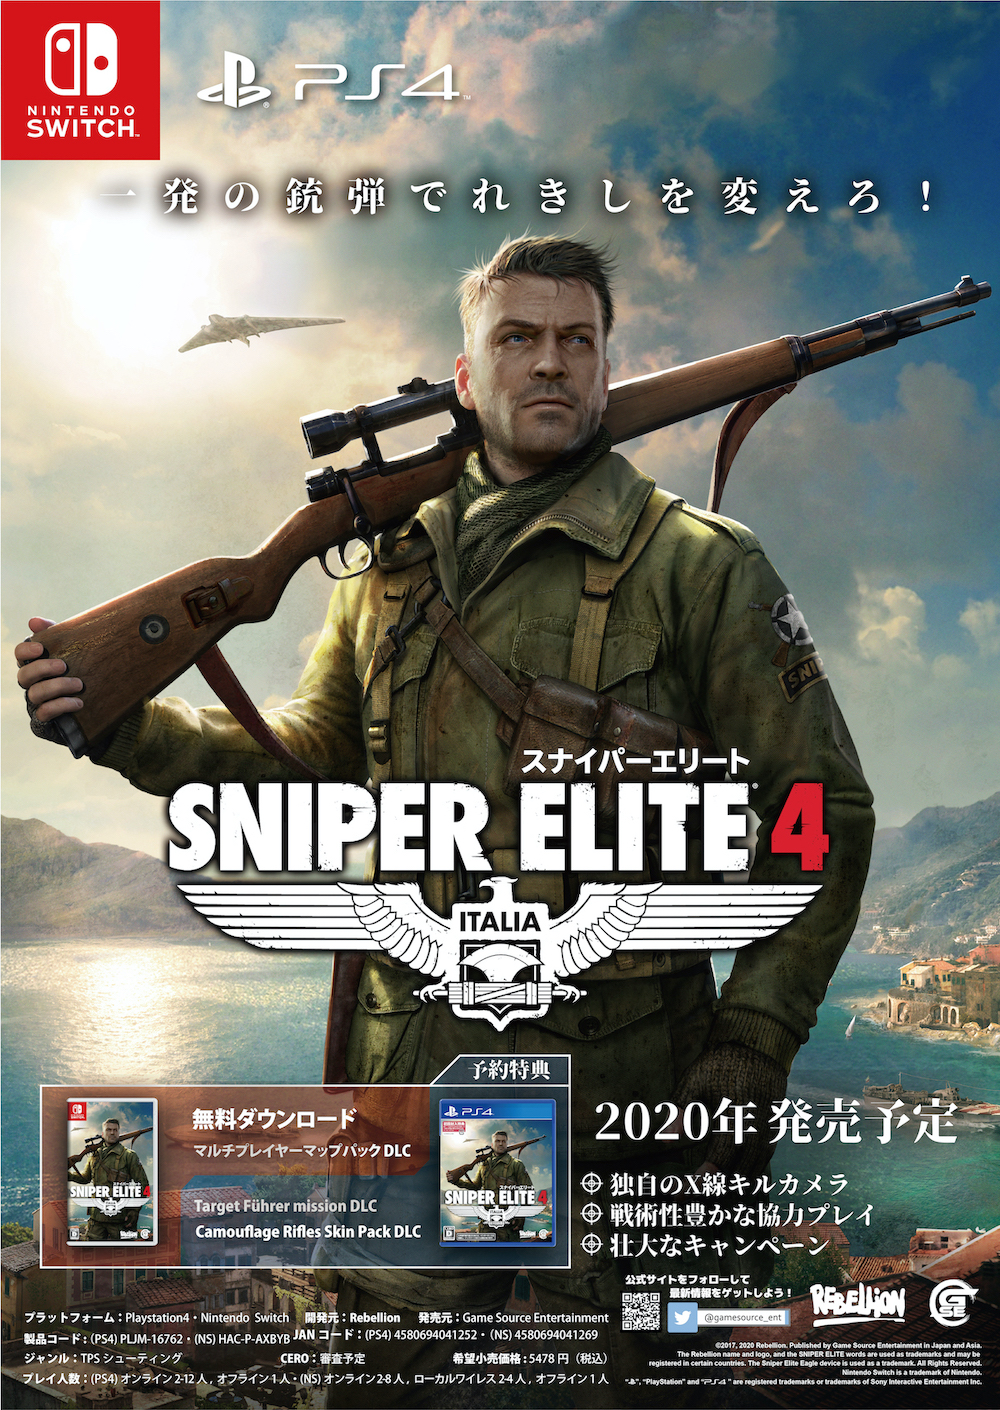 GSE - Game Source Entertainment - 家庭用ゲーム 発売元 - | Sniper 